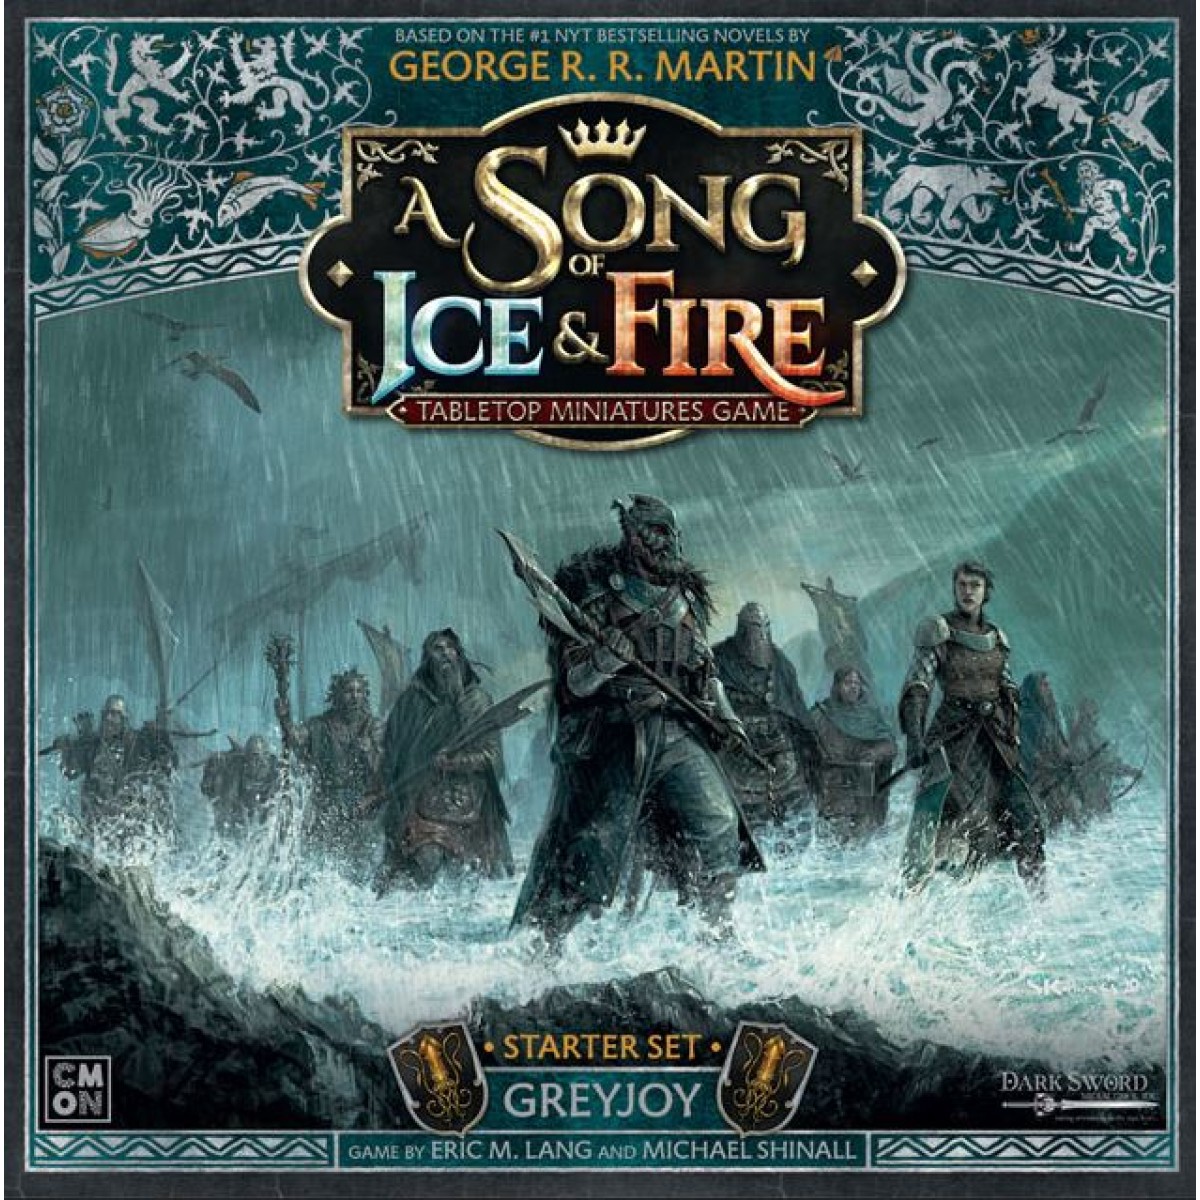 A Song of Ice and Fire - Tabletop Miniatures Game - Greyjoy Starter Set.